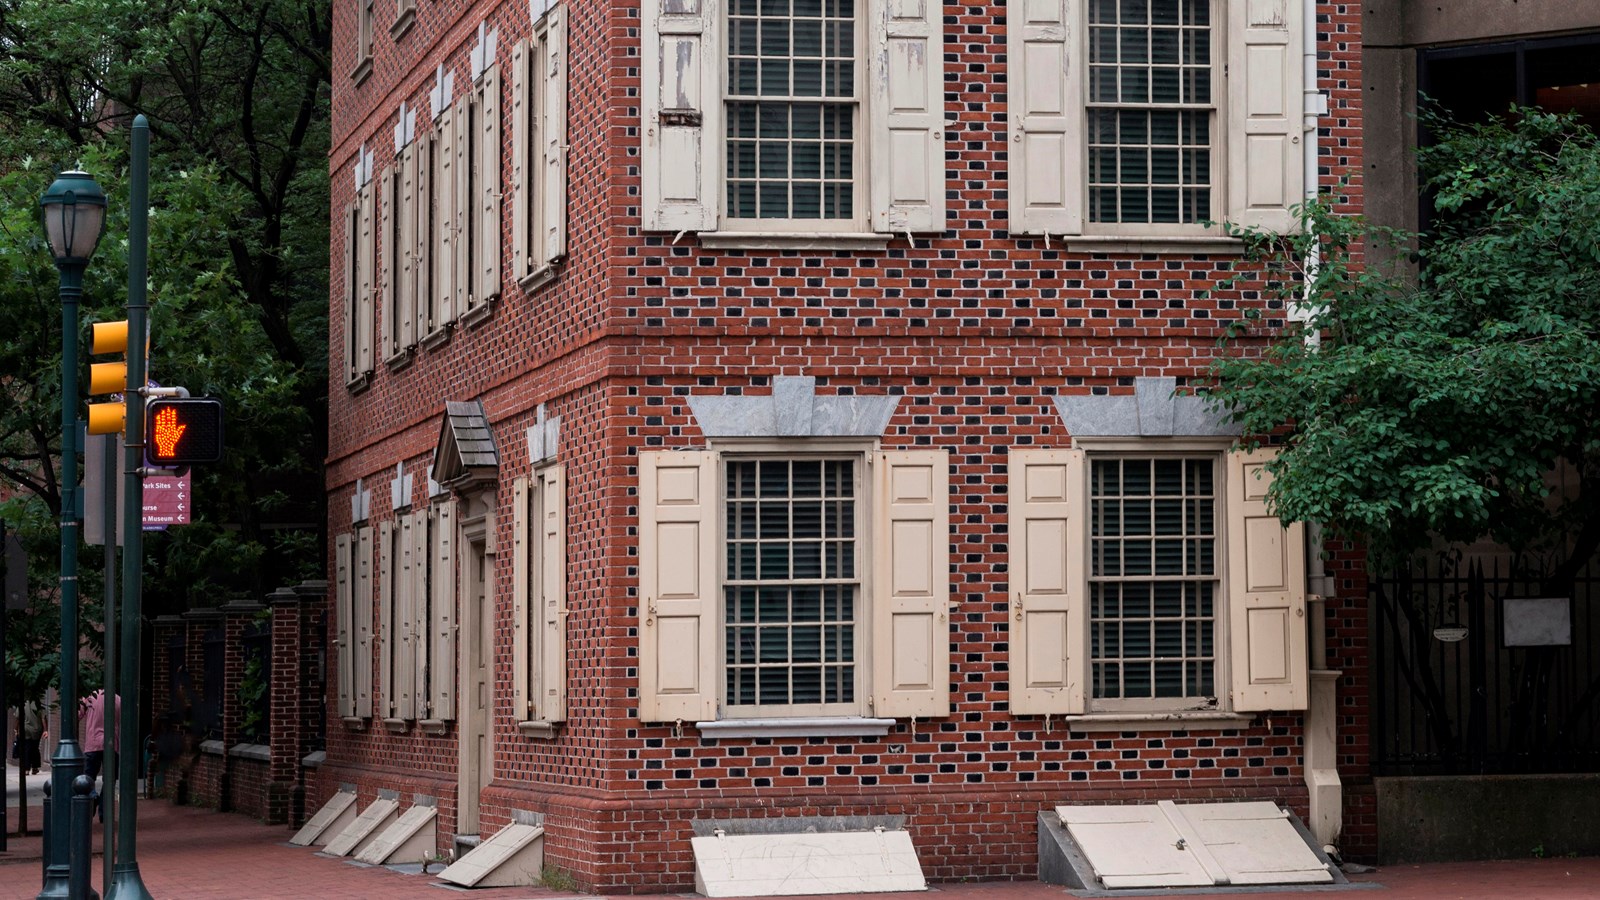 A color photo of a three story brick row house on the corner of a modern street